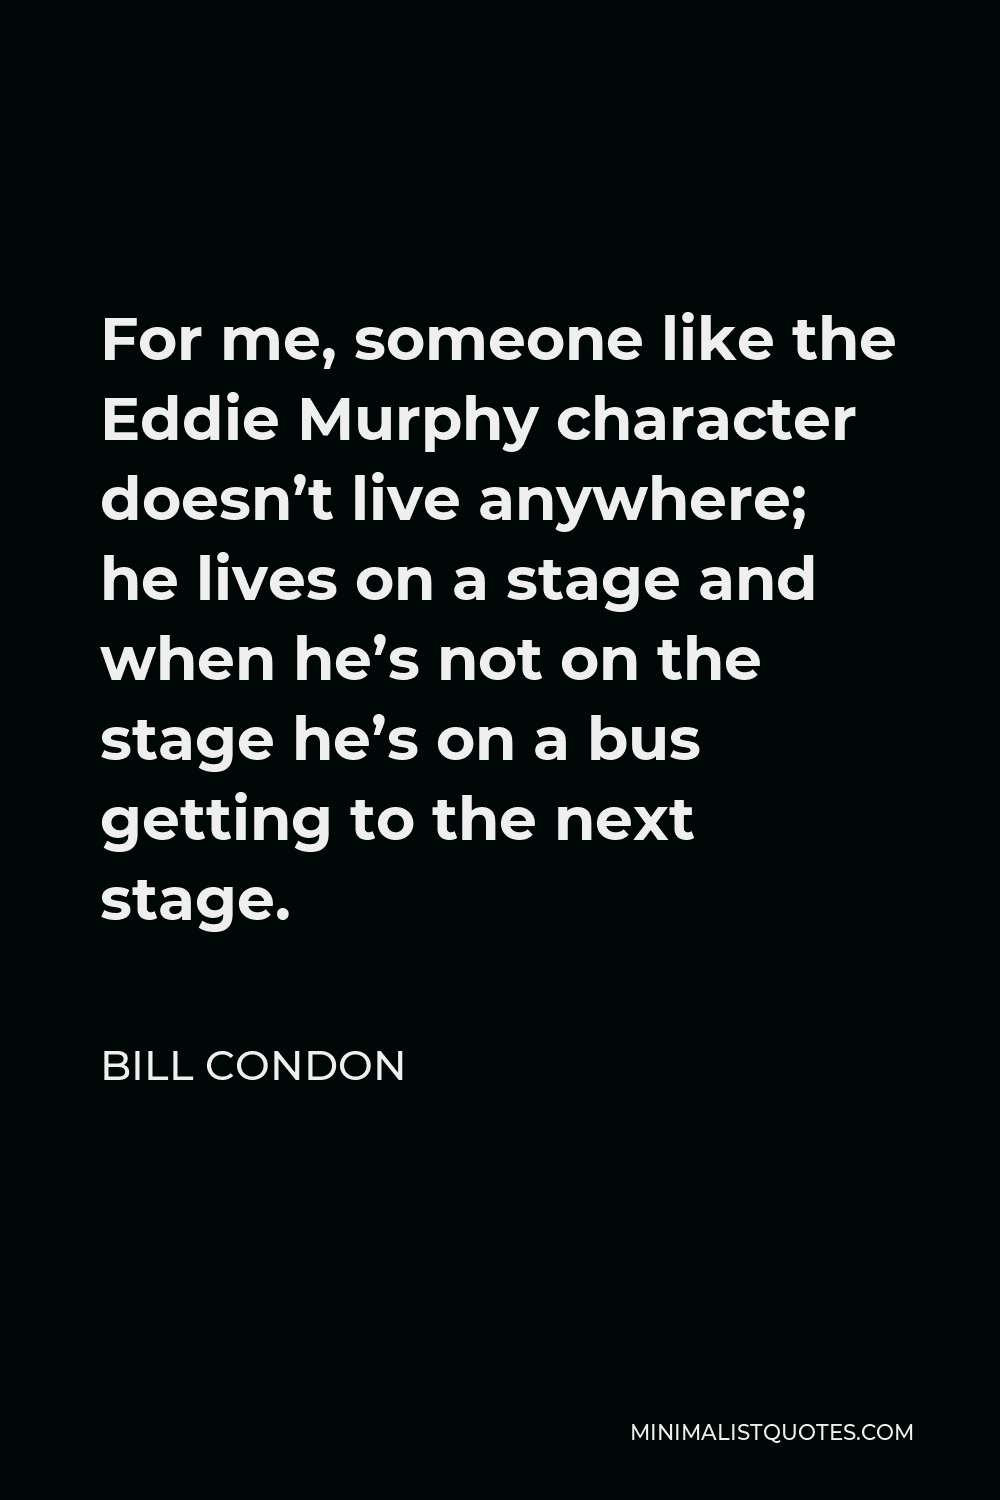 Bill Condon Quote - For me, someone like the Eddie Murphy character doesn’t live anywhere; he lives on a stage and when he’s not on the stage he’s on a bus getting to the next stage.